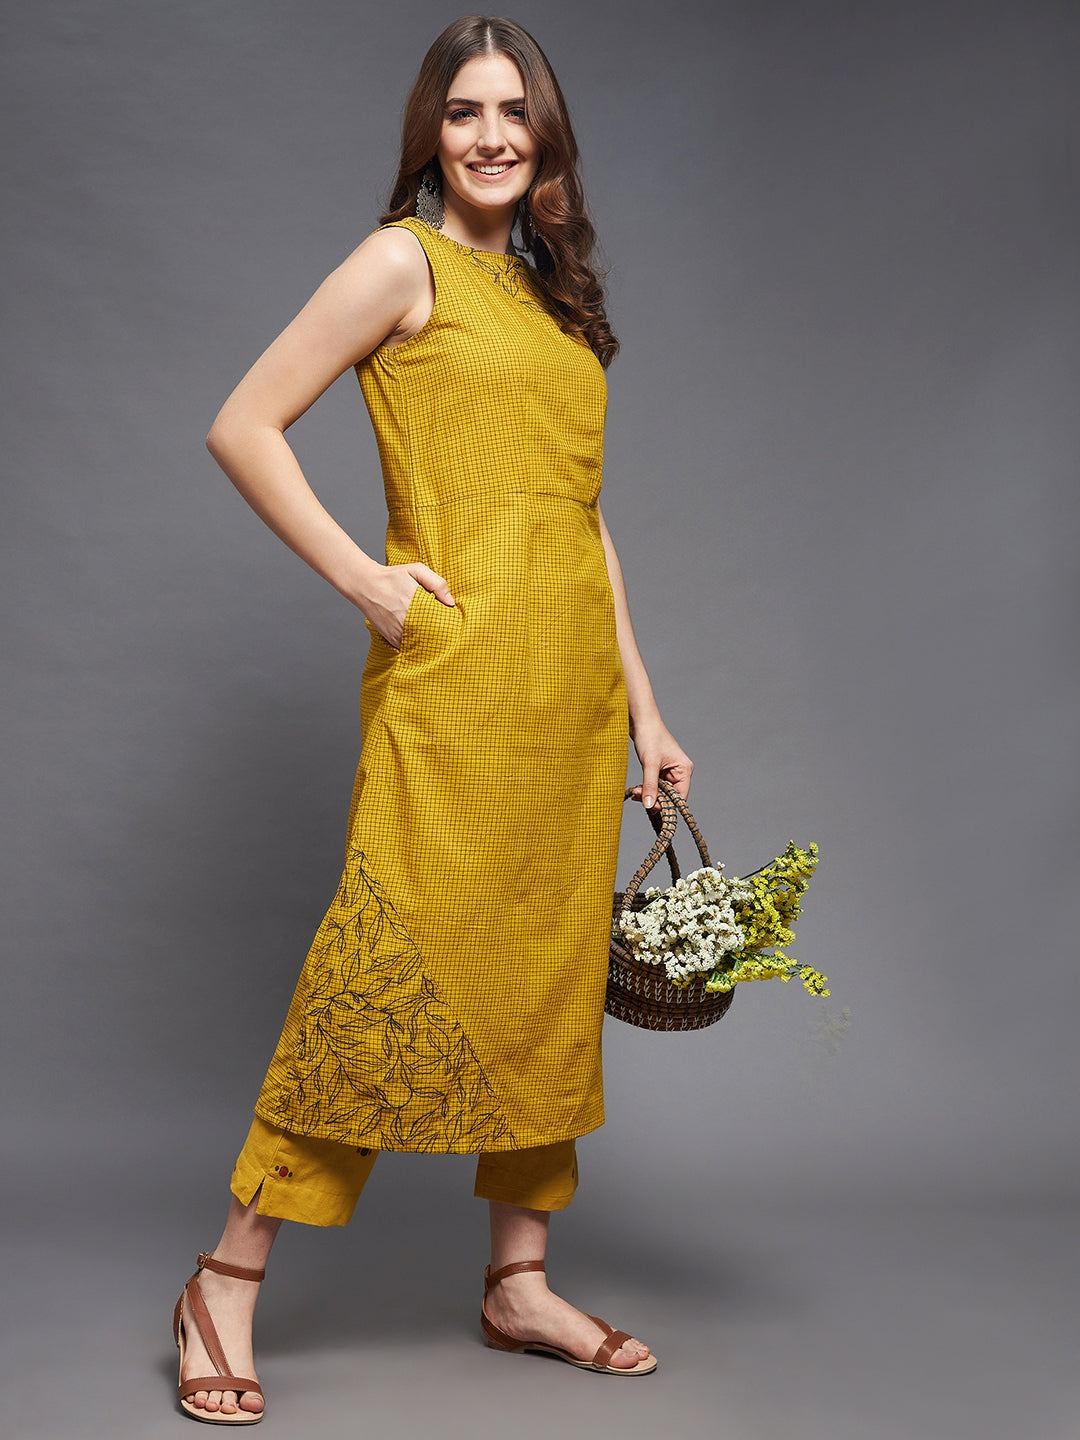 OLIVE BY KARIKA PRESENTS SOUTH COTTON KURTI COLLECTION AT AUTHORIZED  MANUFACTURER RATE BY ASHIRWAD ONLINE AGENCY - Ashirwad Agency